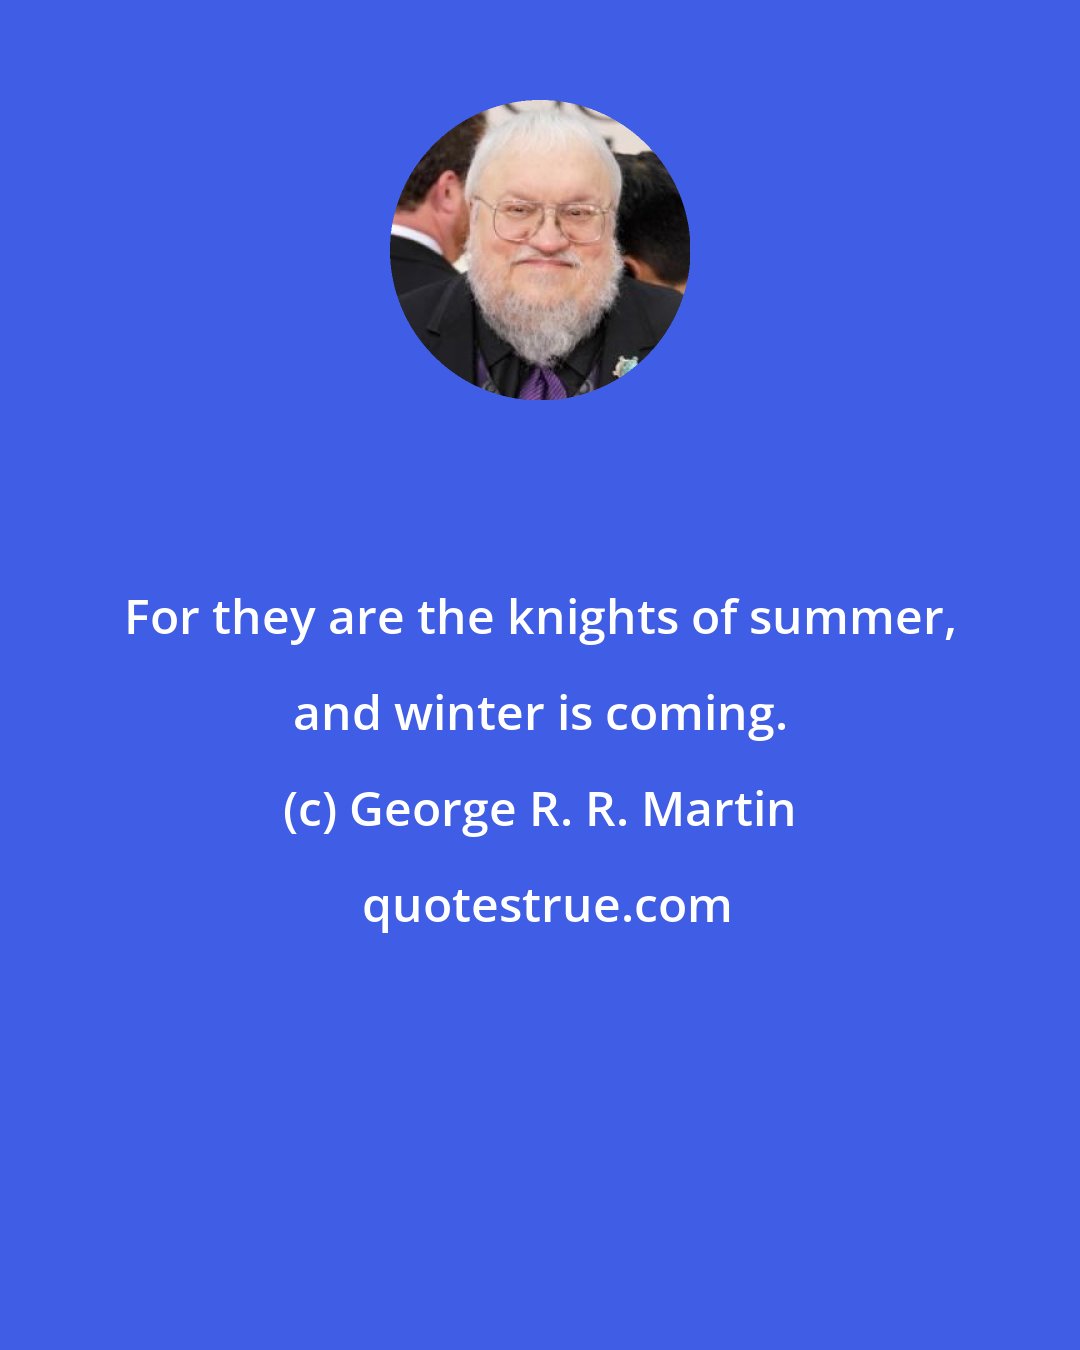 George R. R. Martin: For they are the knights of summer, and winter is coming.